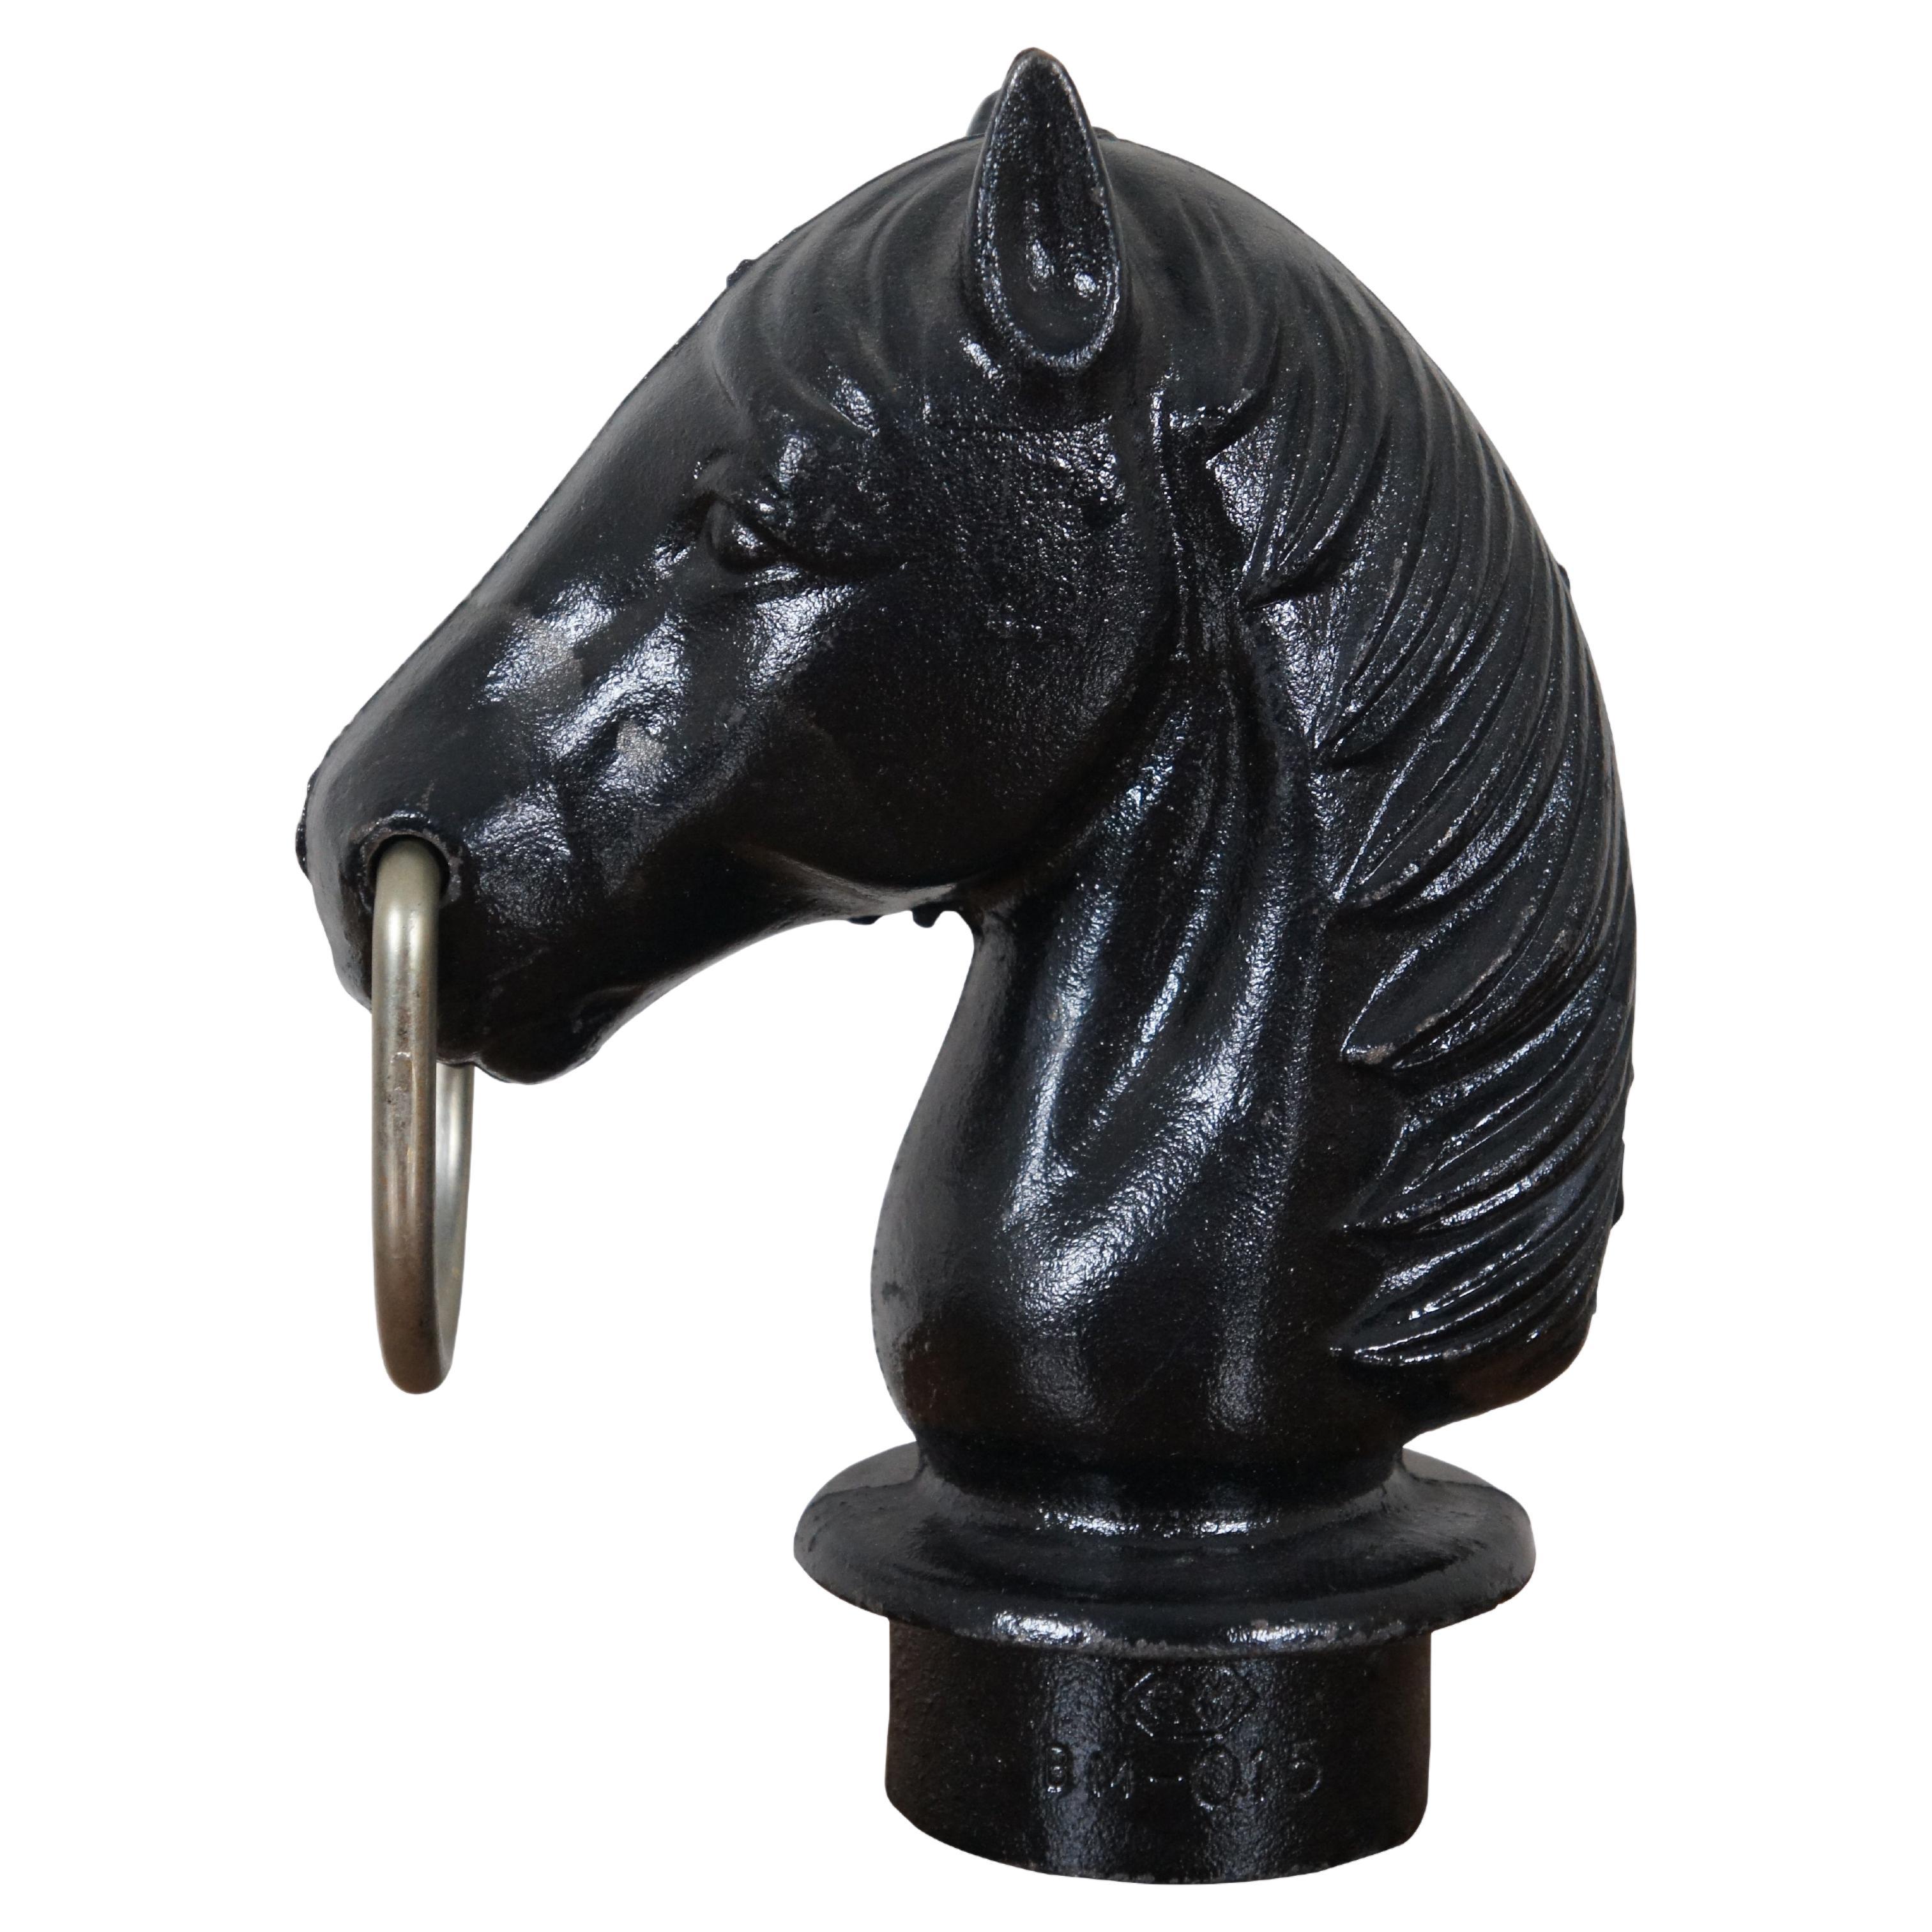 Vintage heavy cast iron horse head hitching post.  Marked BM-015.

Dimensions:
7.25” x 4” x 9.25” (Width x Depth x Height)